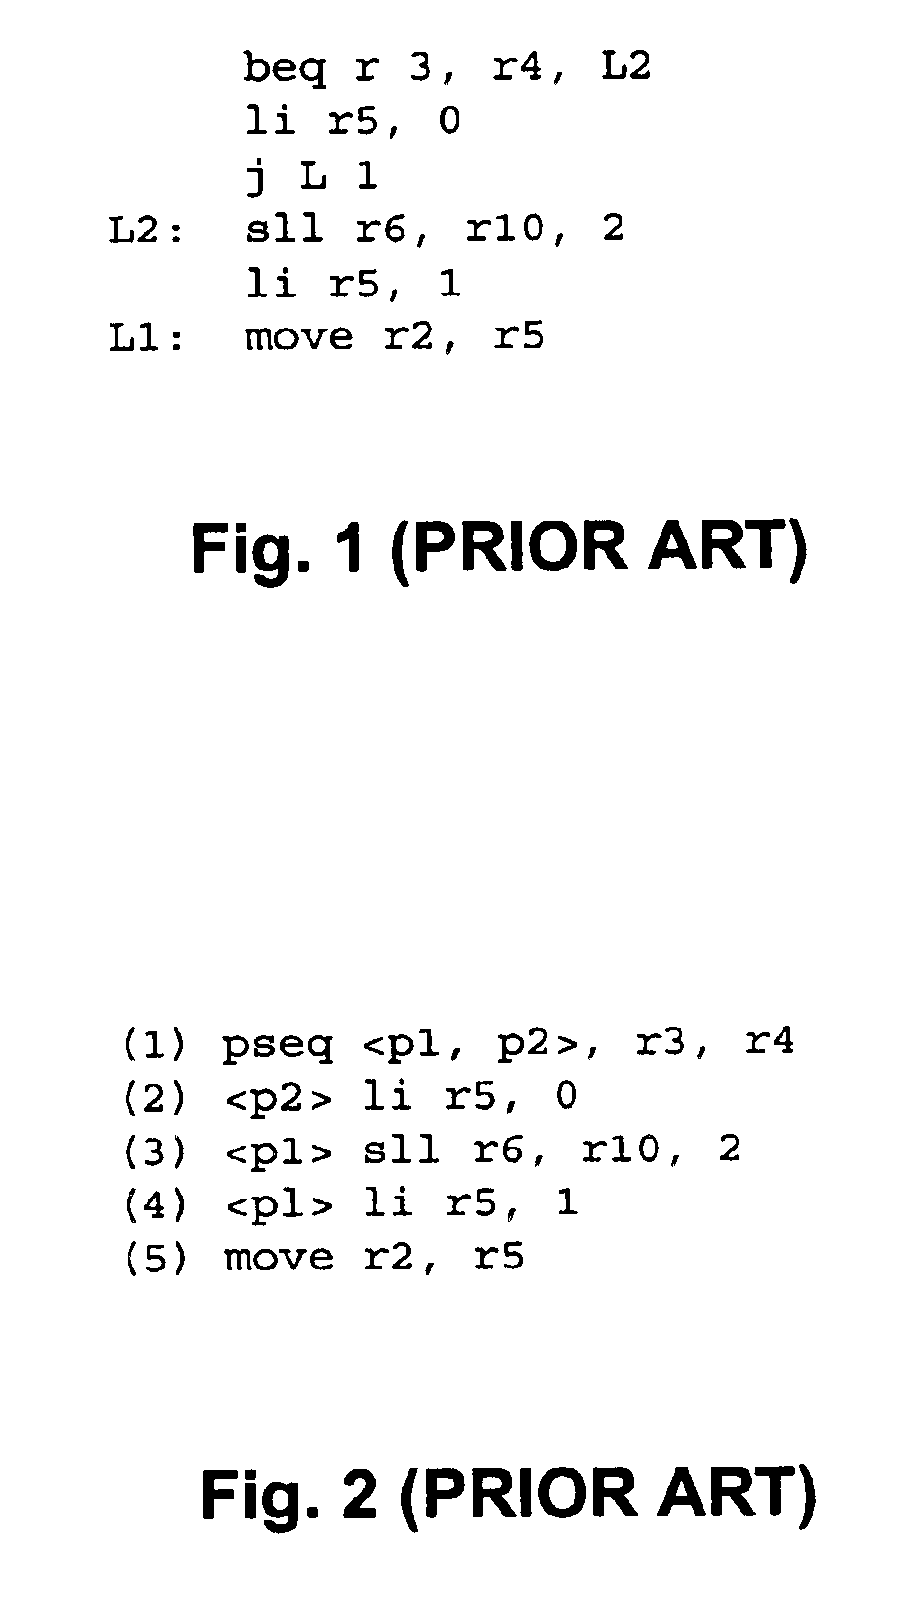 Central processing apparatus and a compile method